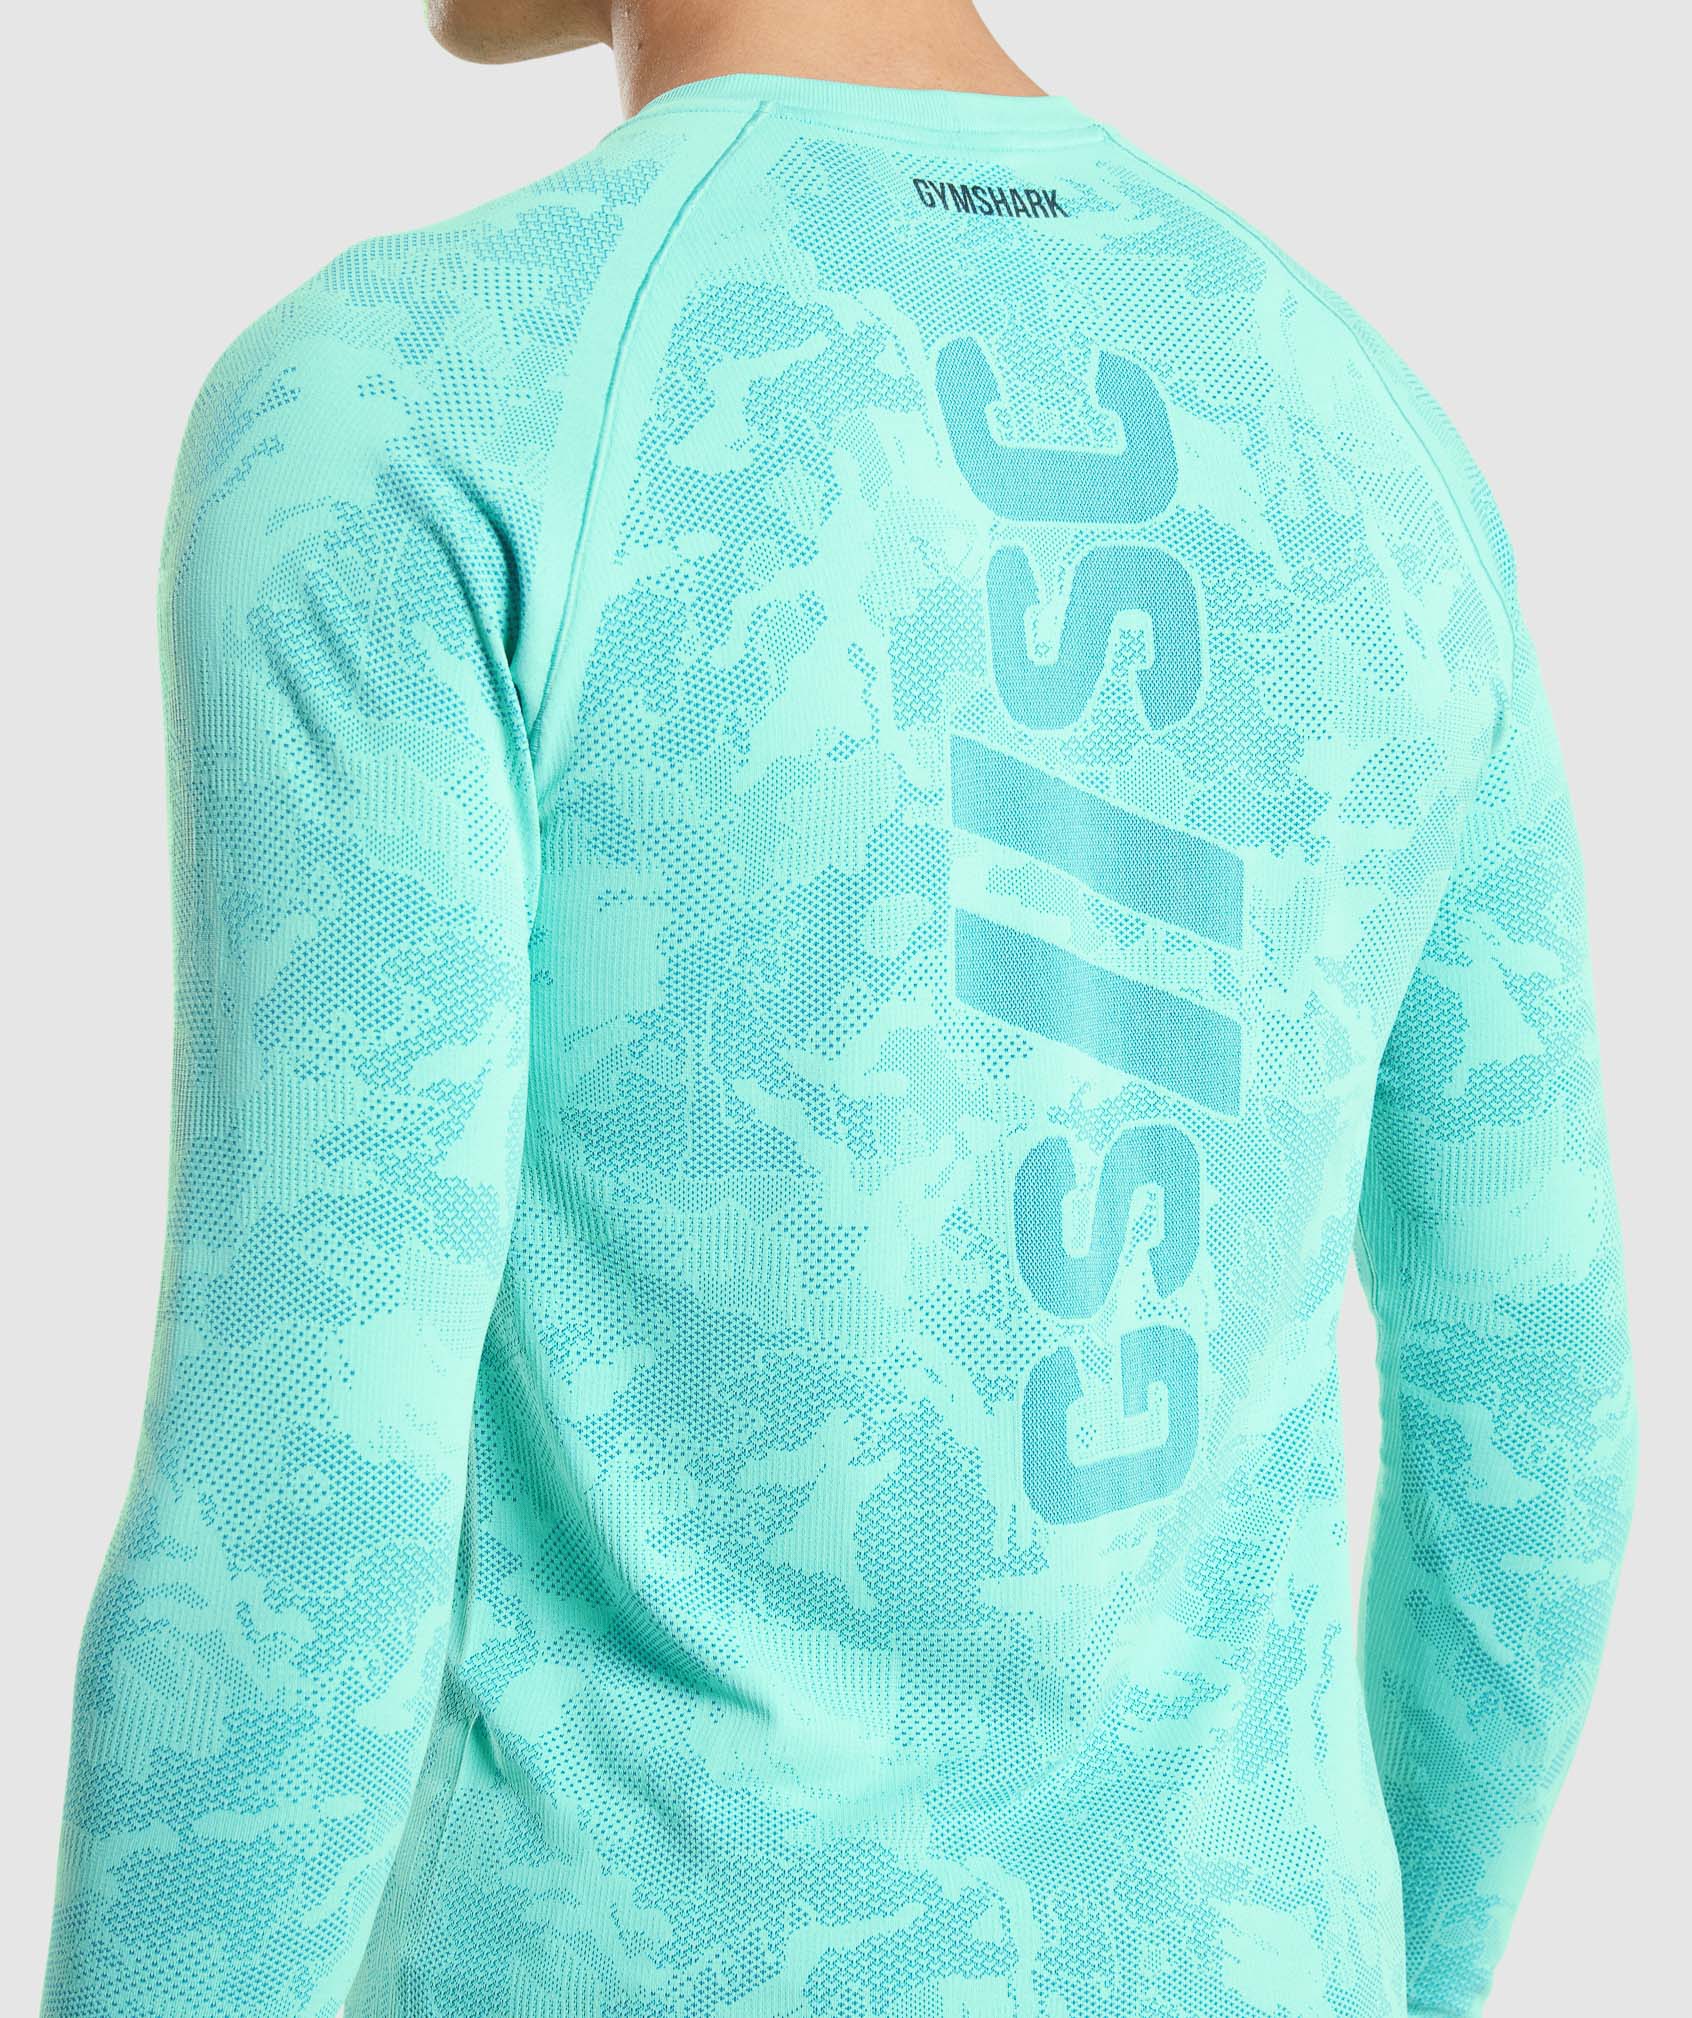 Gymshark//Steve Cook Long Sleeve Seamless T-Shirt in Bright Turquoise/Atlas Blue - view 4